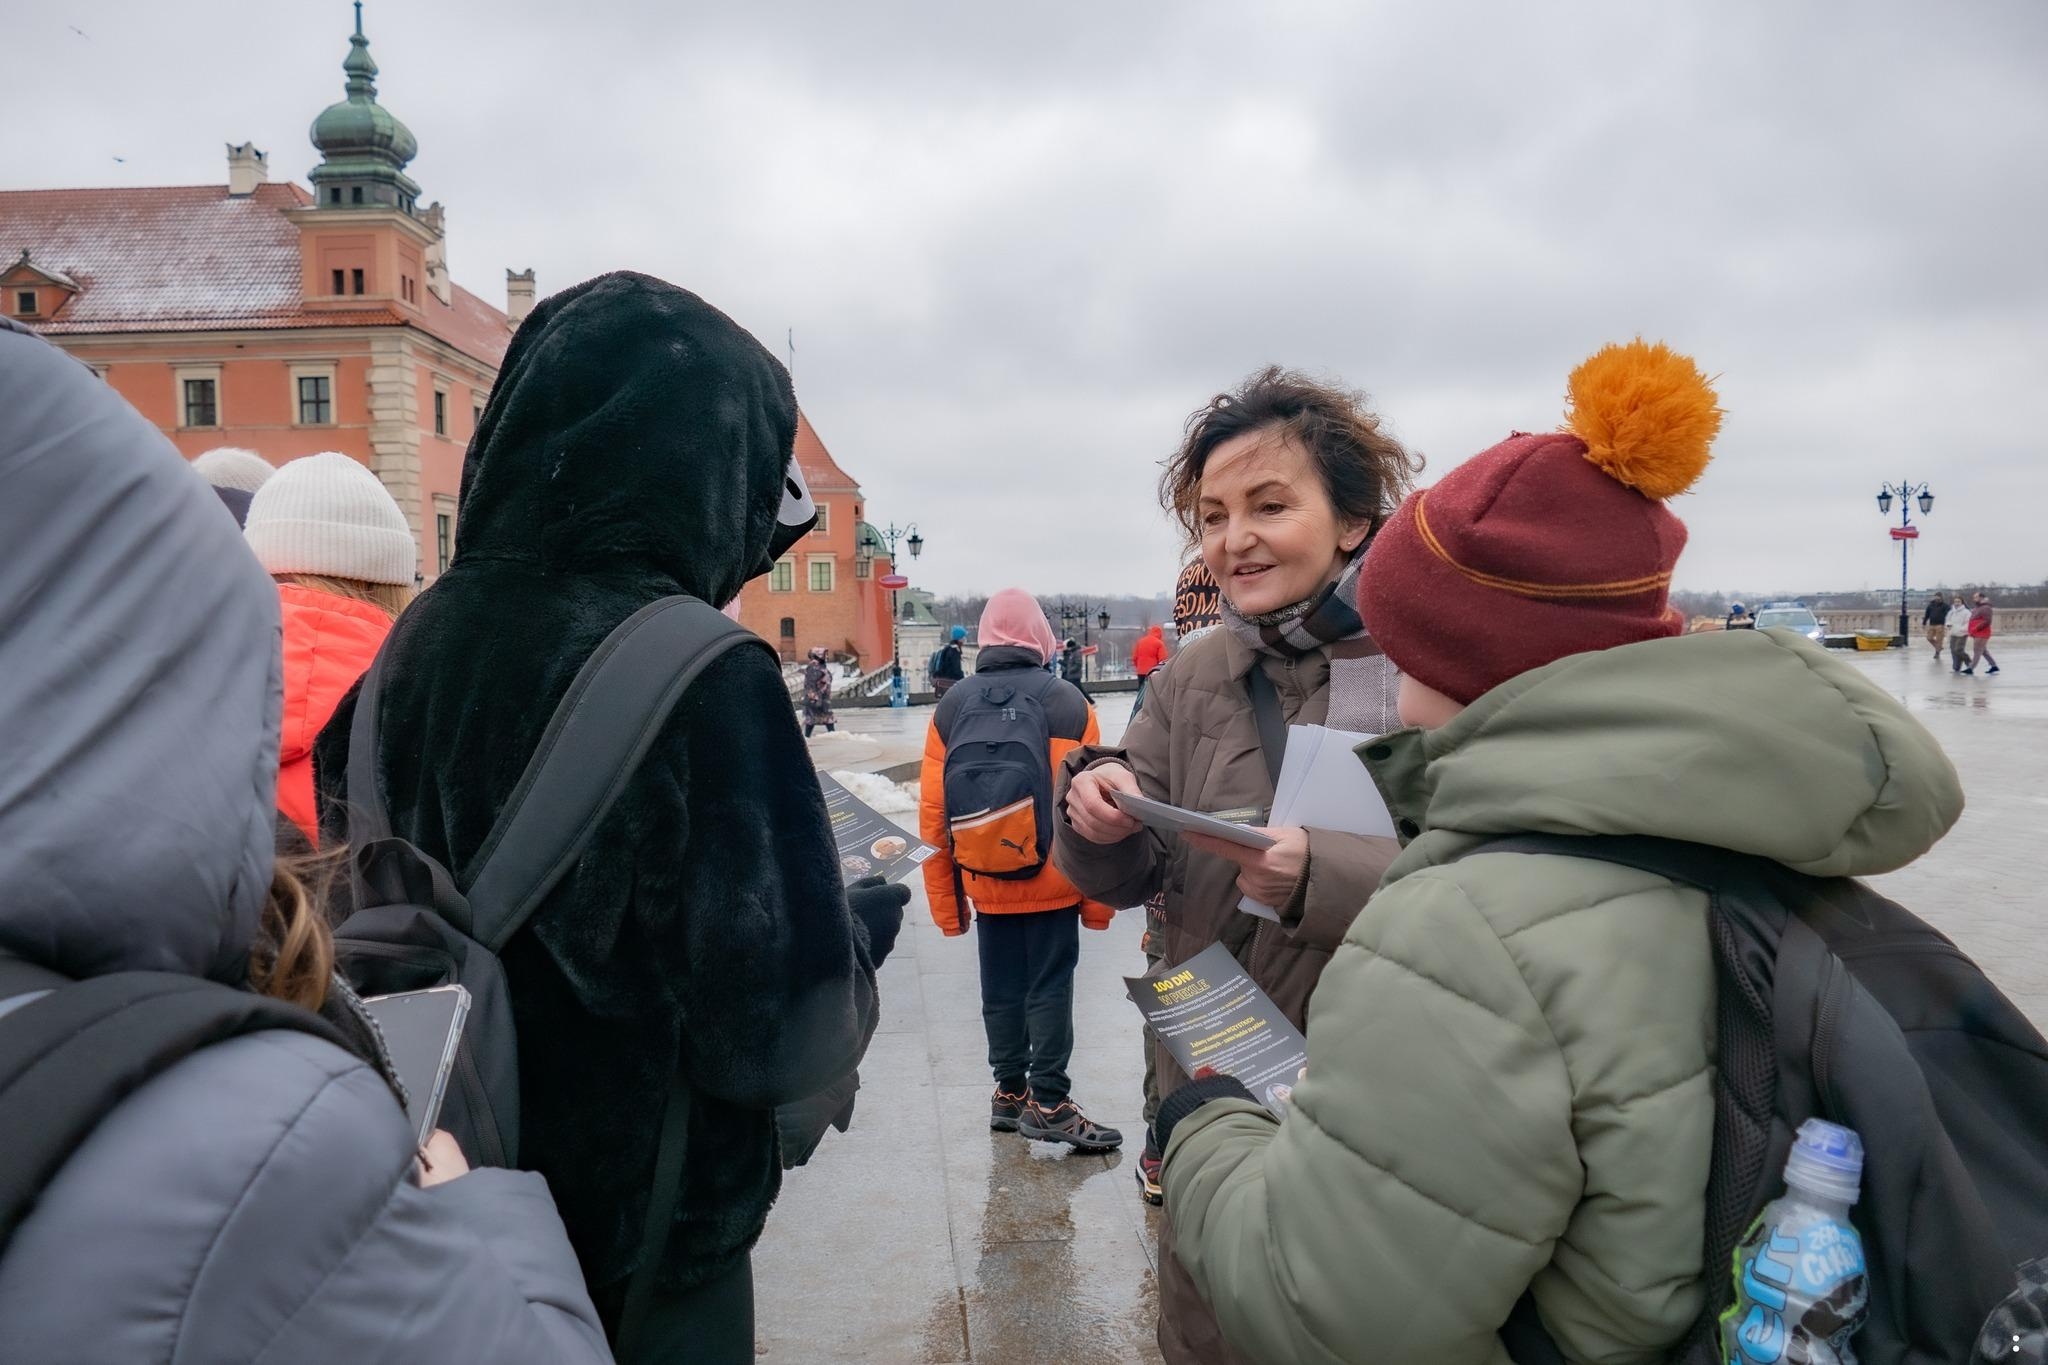 Handing out leaflets // A demonstration in Warsaw marking 100 days